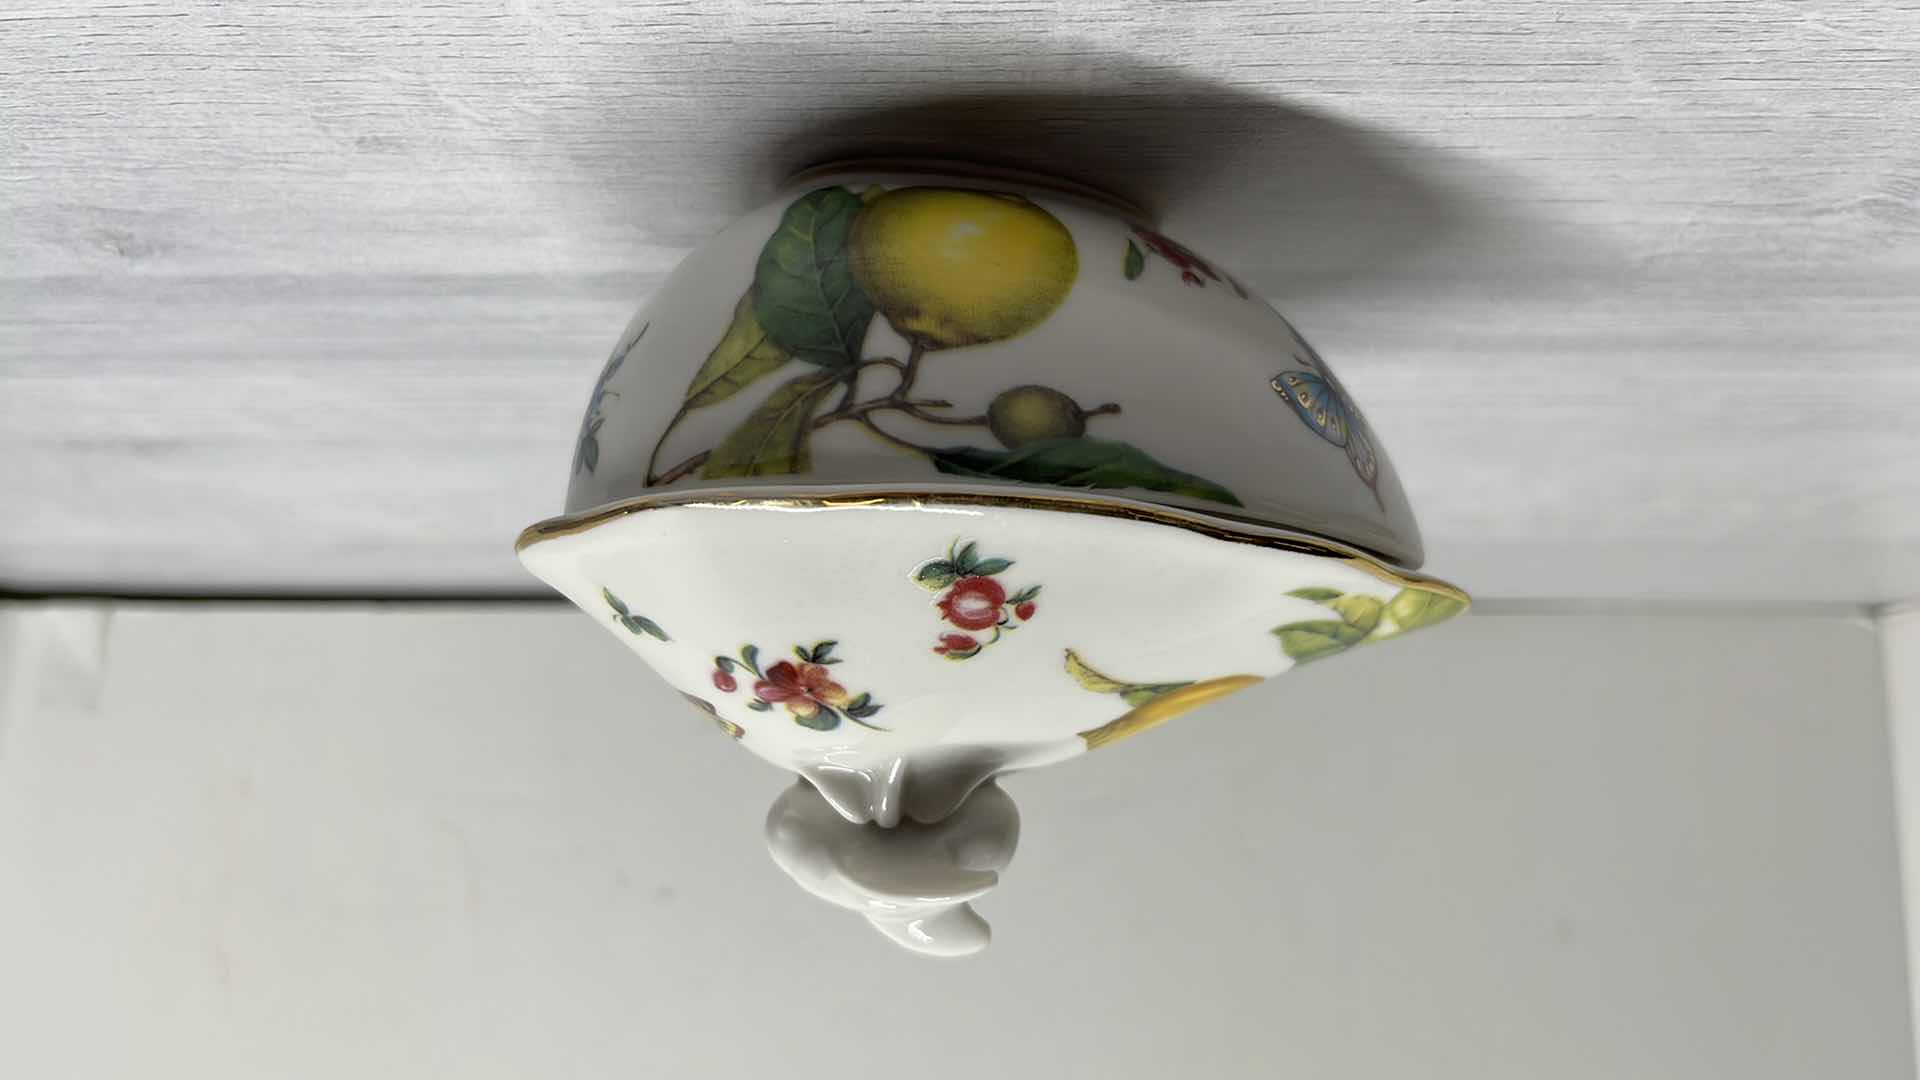 Photo 1 of TANIA BULHOES MARQUESA COLLECTION PORCELAIN BOWL W COVER 3.75” X 4.25” H4” 